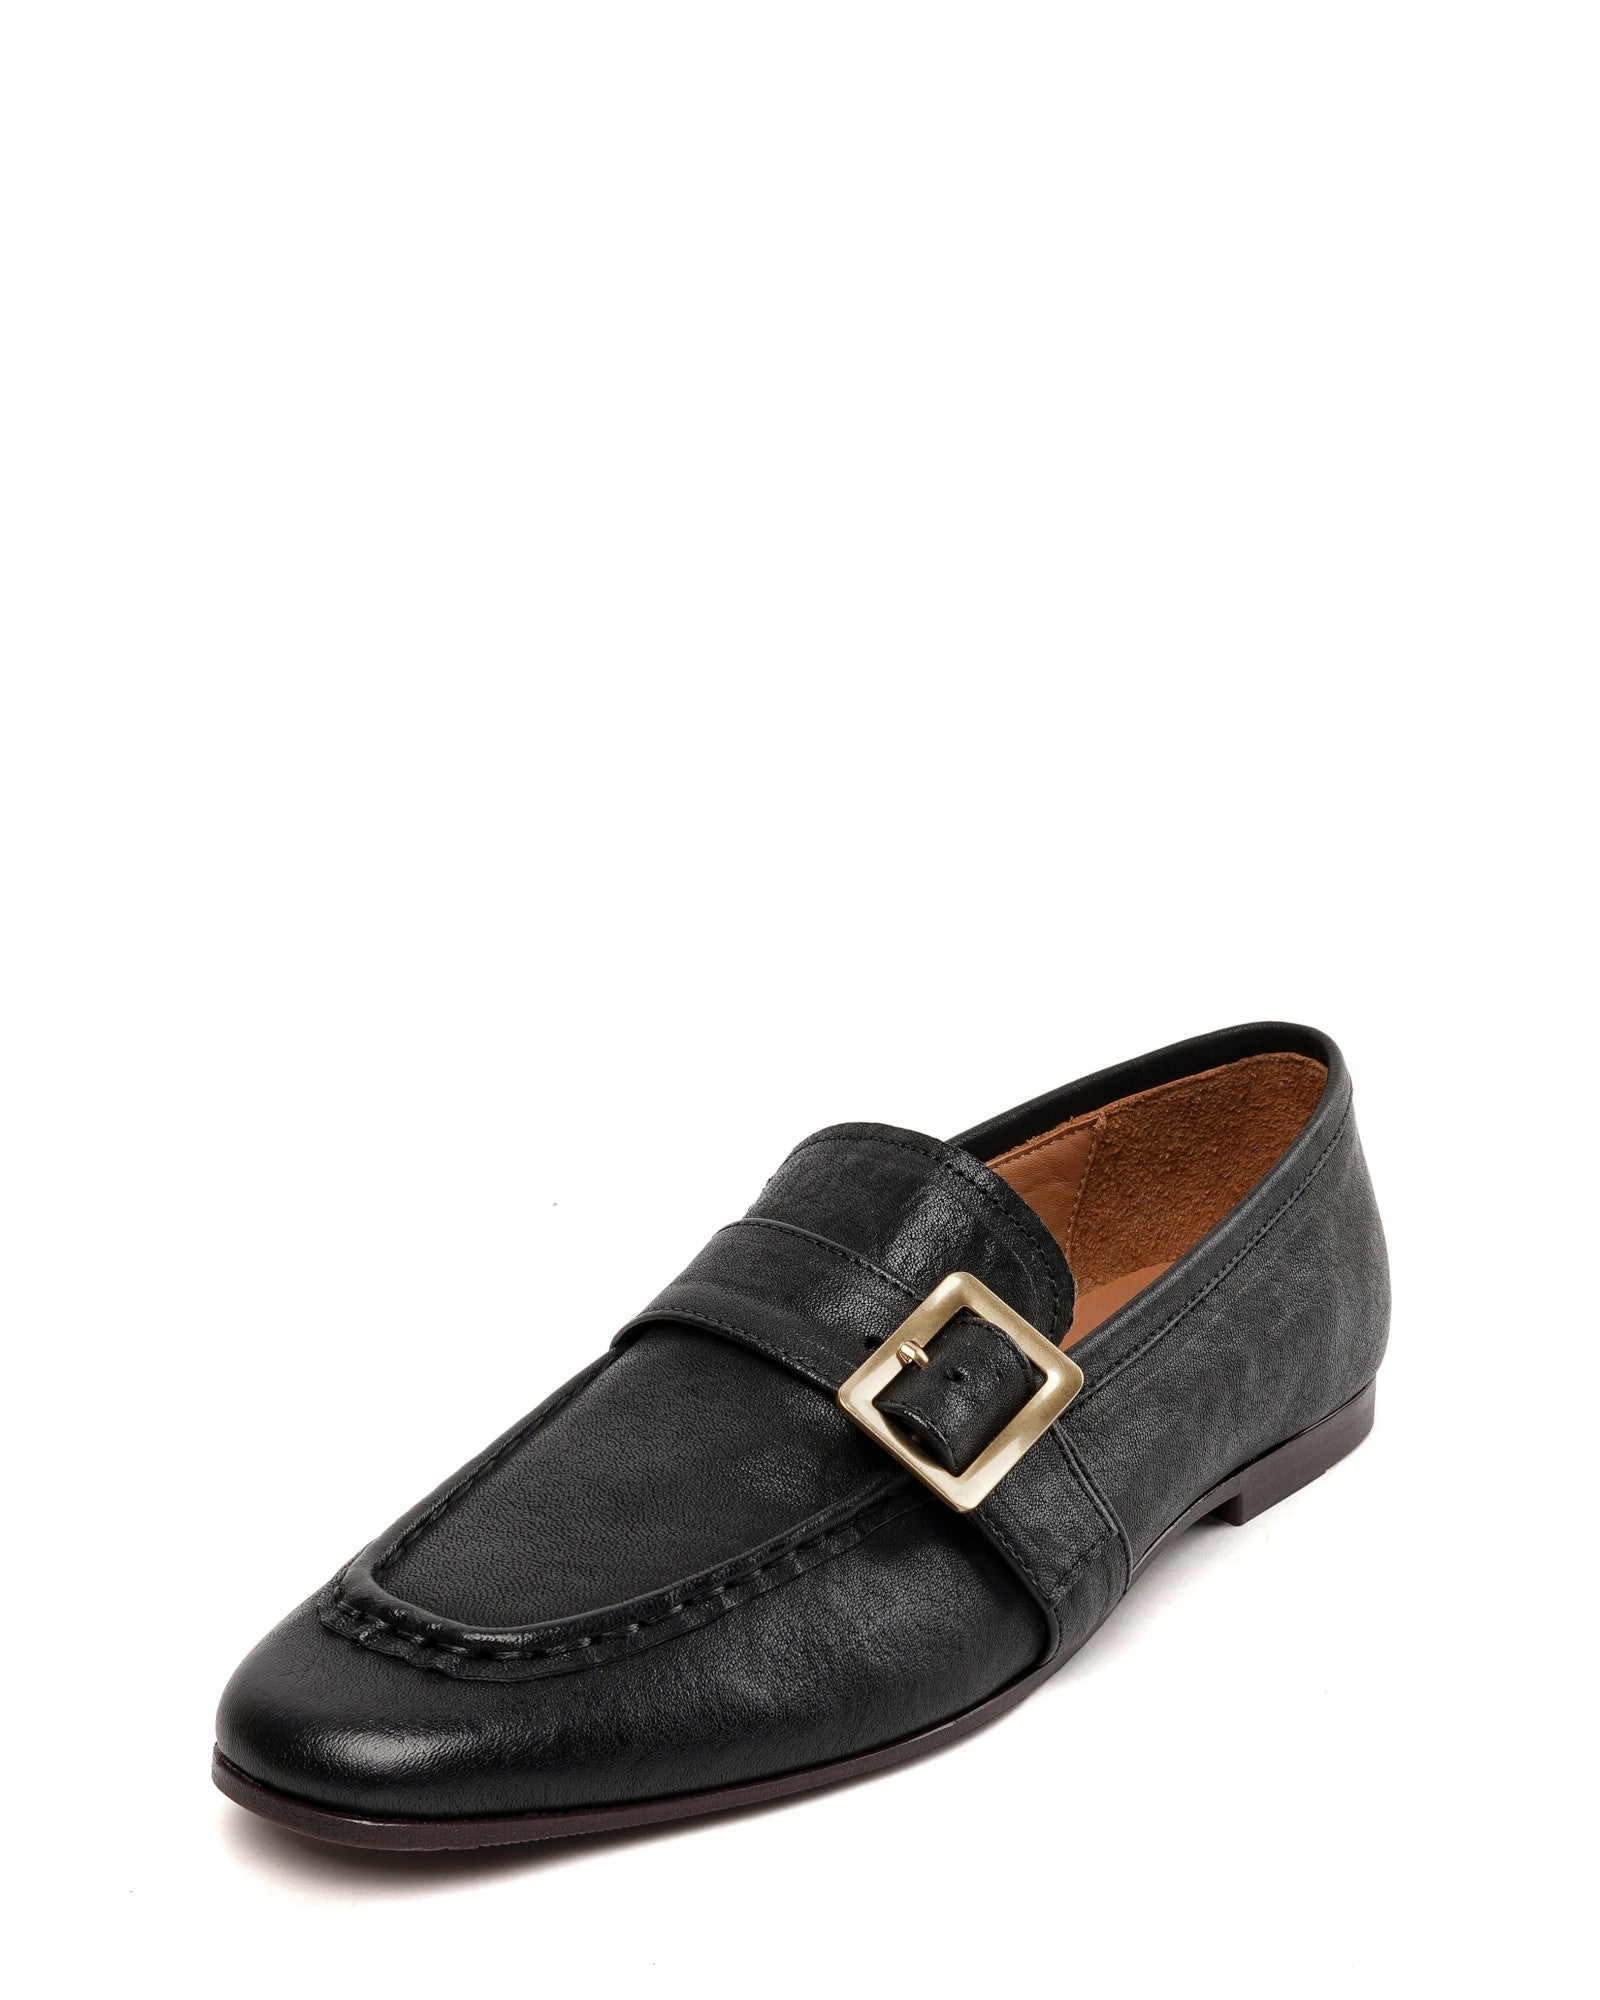 386-horse-leather-black-loafers